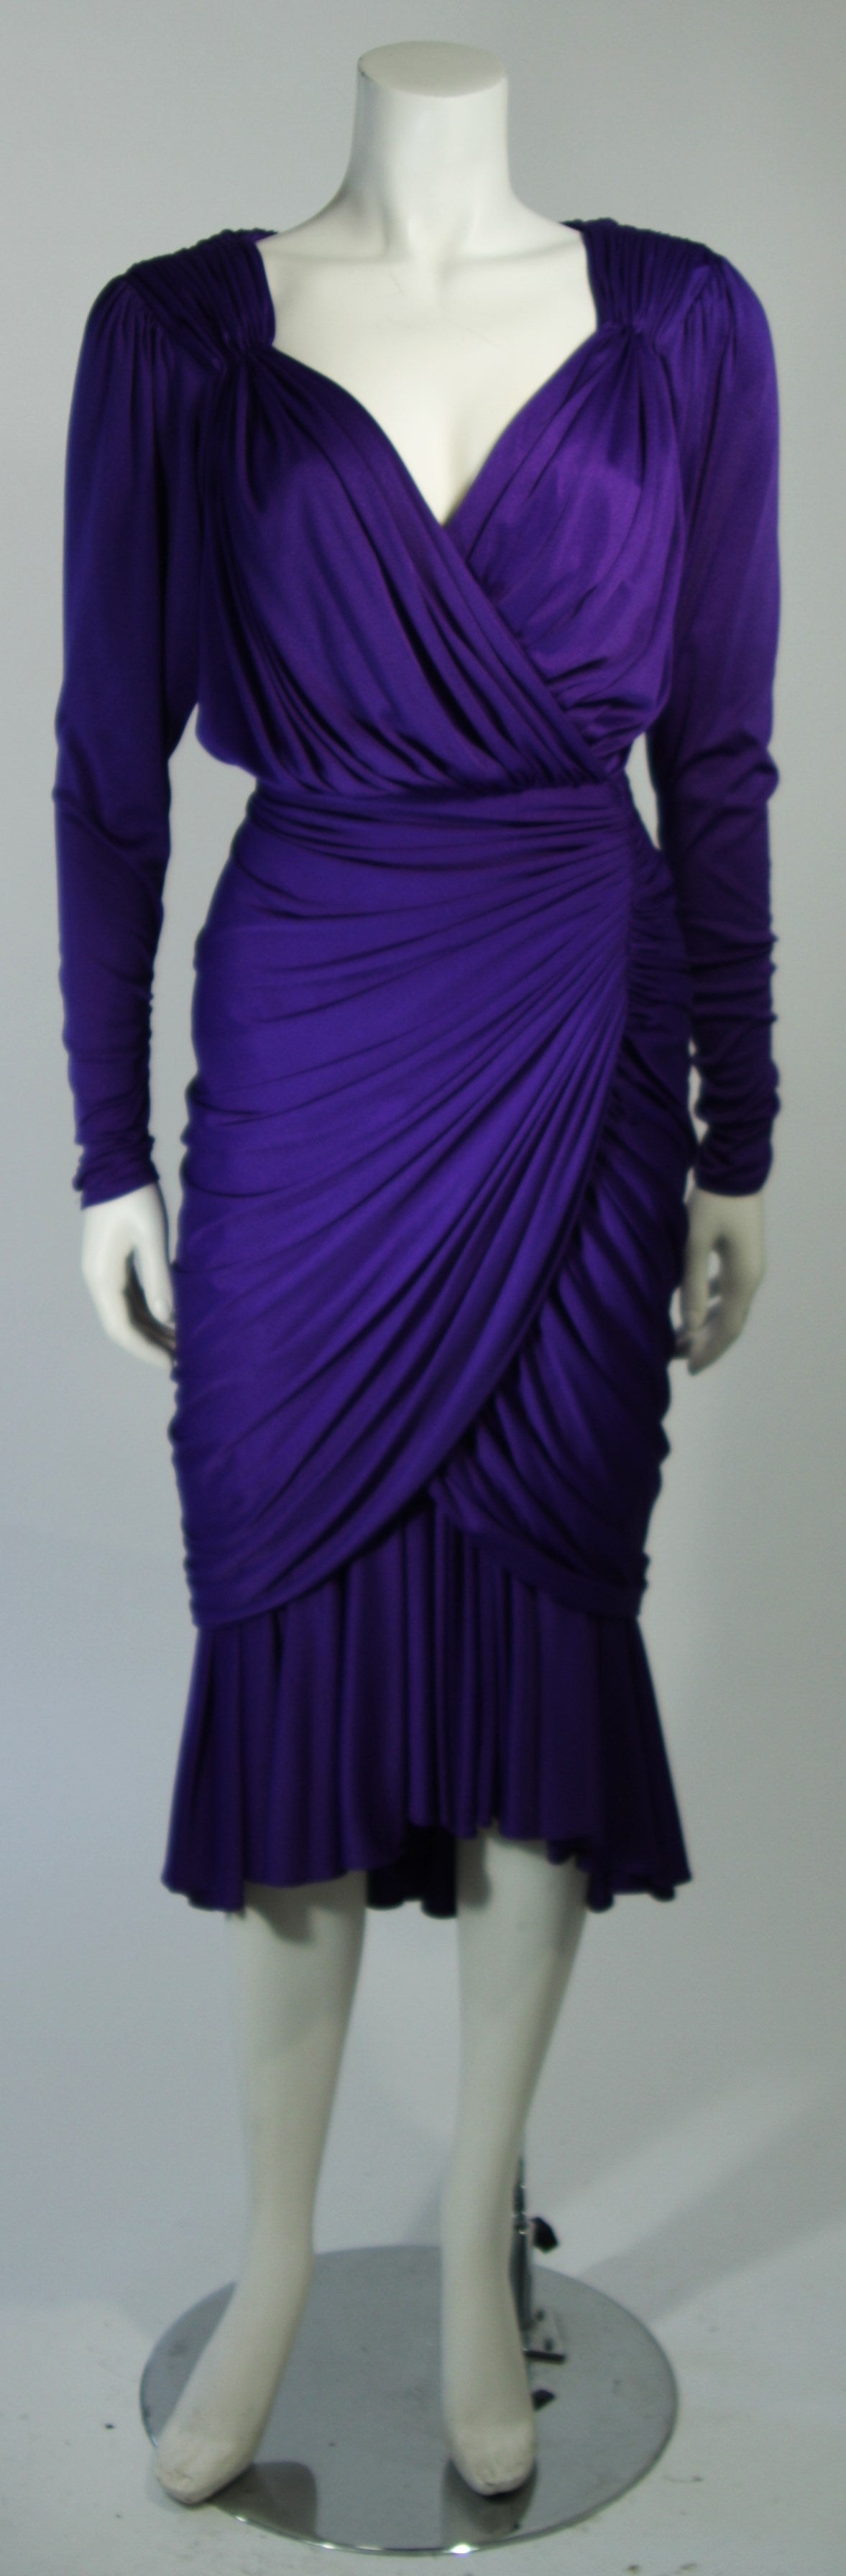 This vintage cocktail dress is fashioned from an purple jersey. Features ruching throughout and a v-neck plunge neckline with a center back zipper. In excellent condition.

**Please cross-reference measurements for personal accuracy. The size